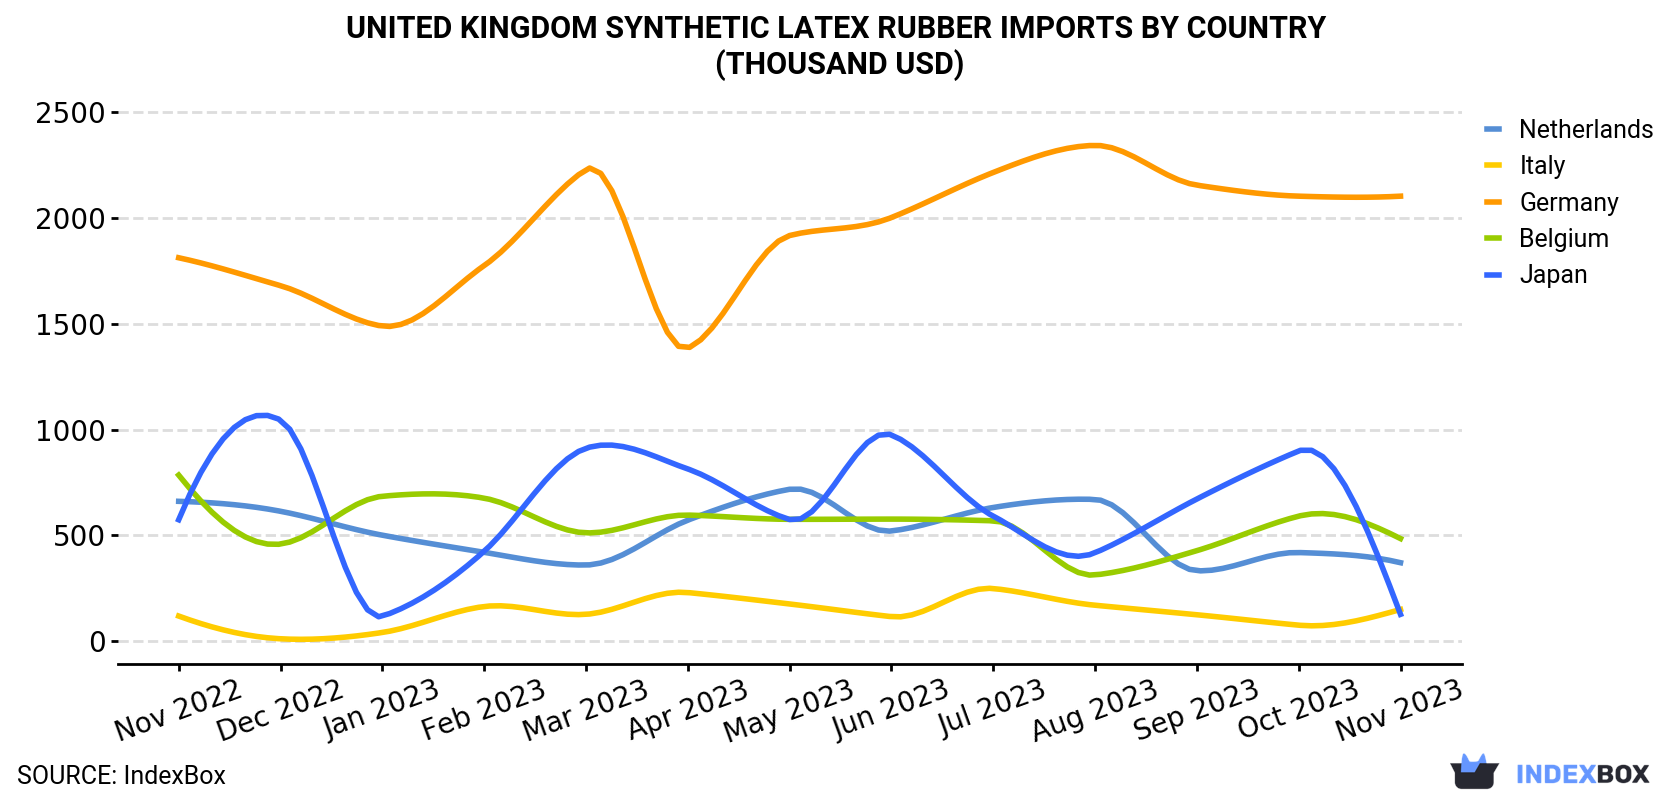 United Kingdom Synthetic Latex Rubber Imports By Country (Thousand USD)